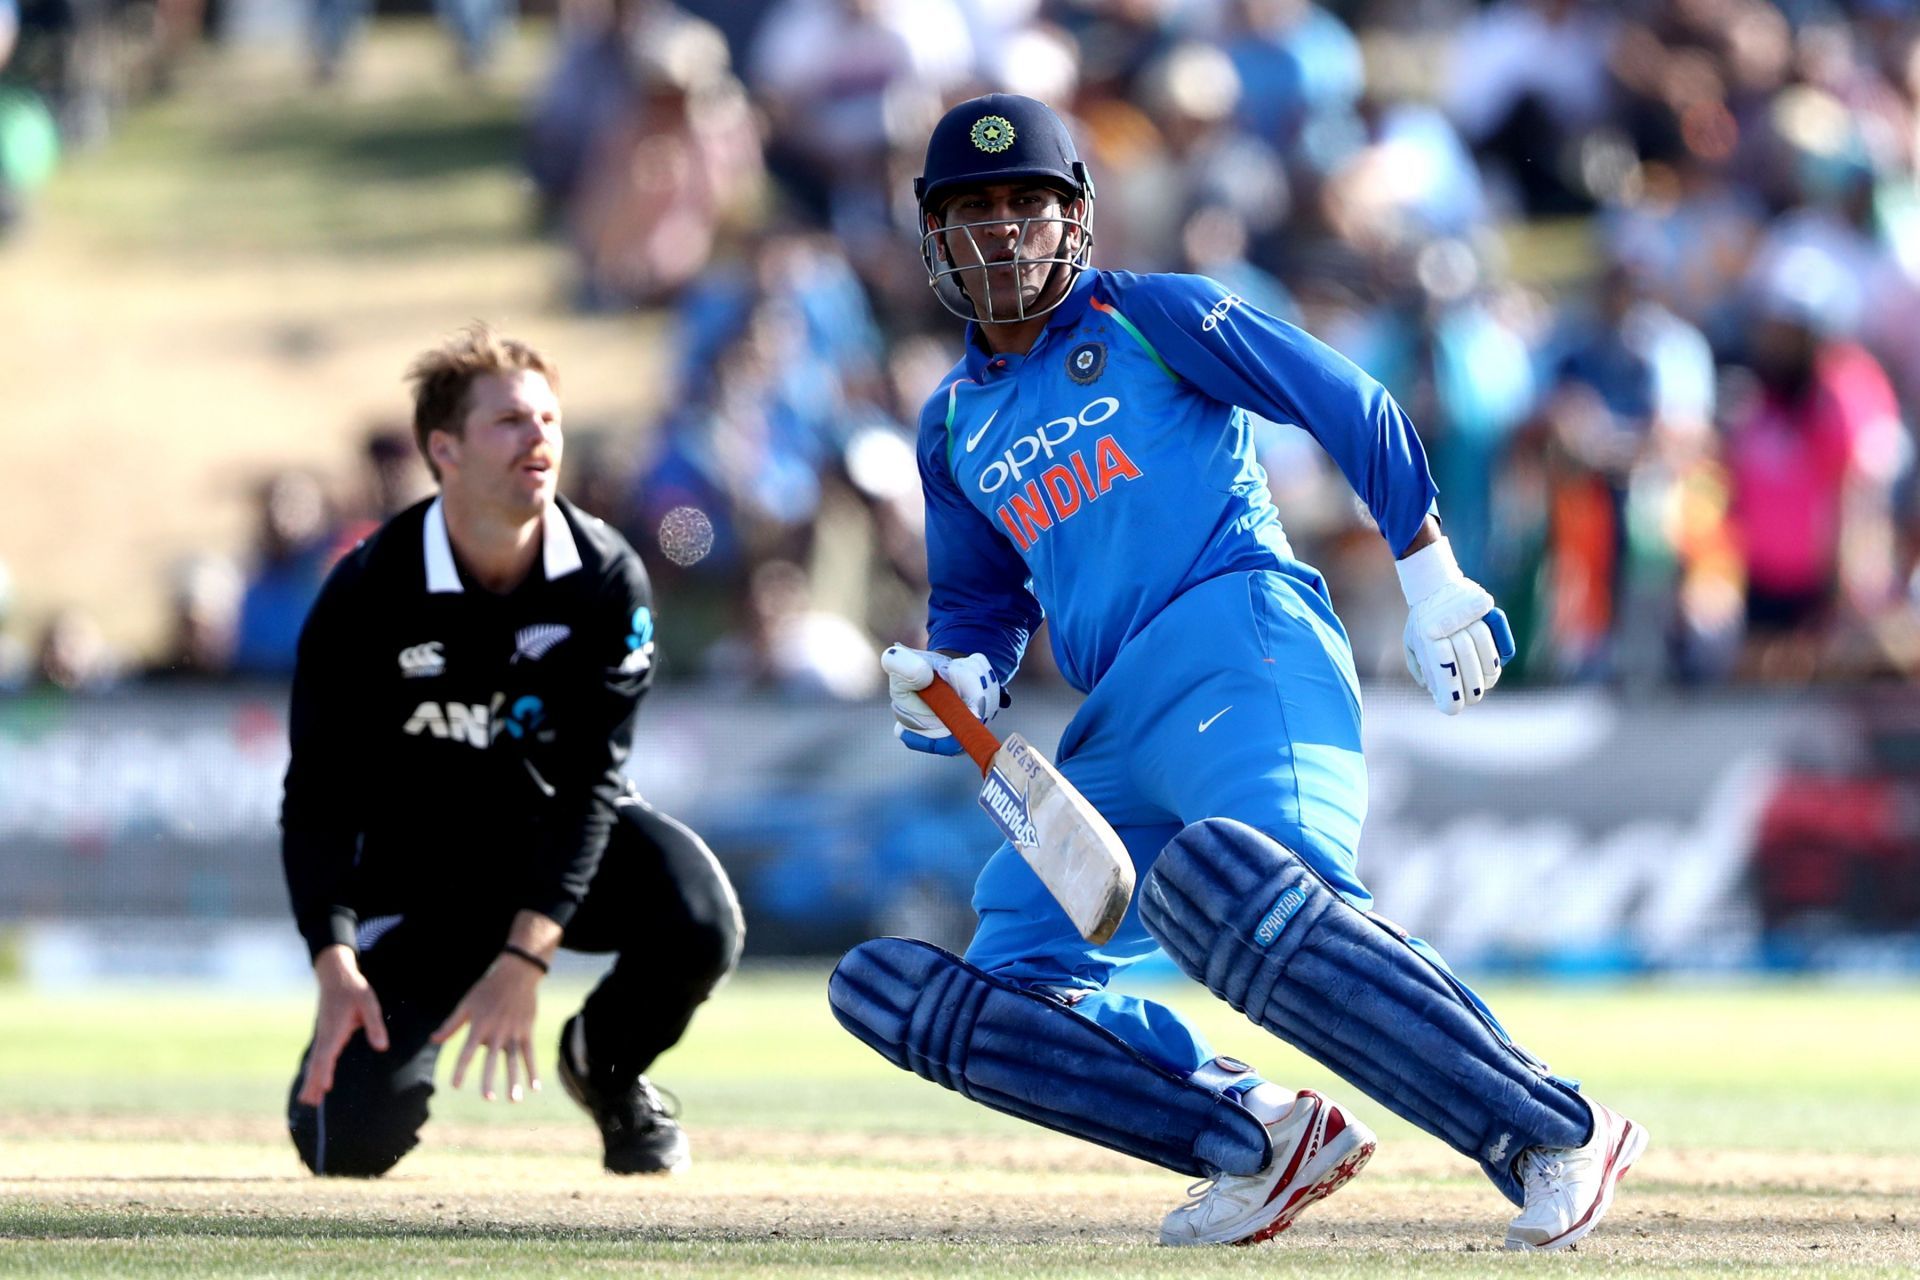 MS Dhoni has retired from all formats of international cricket